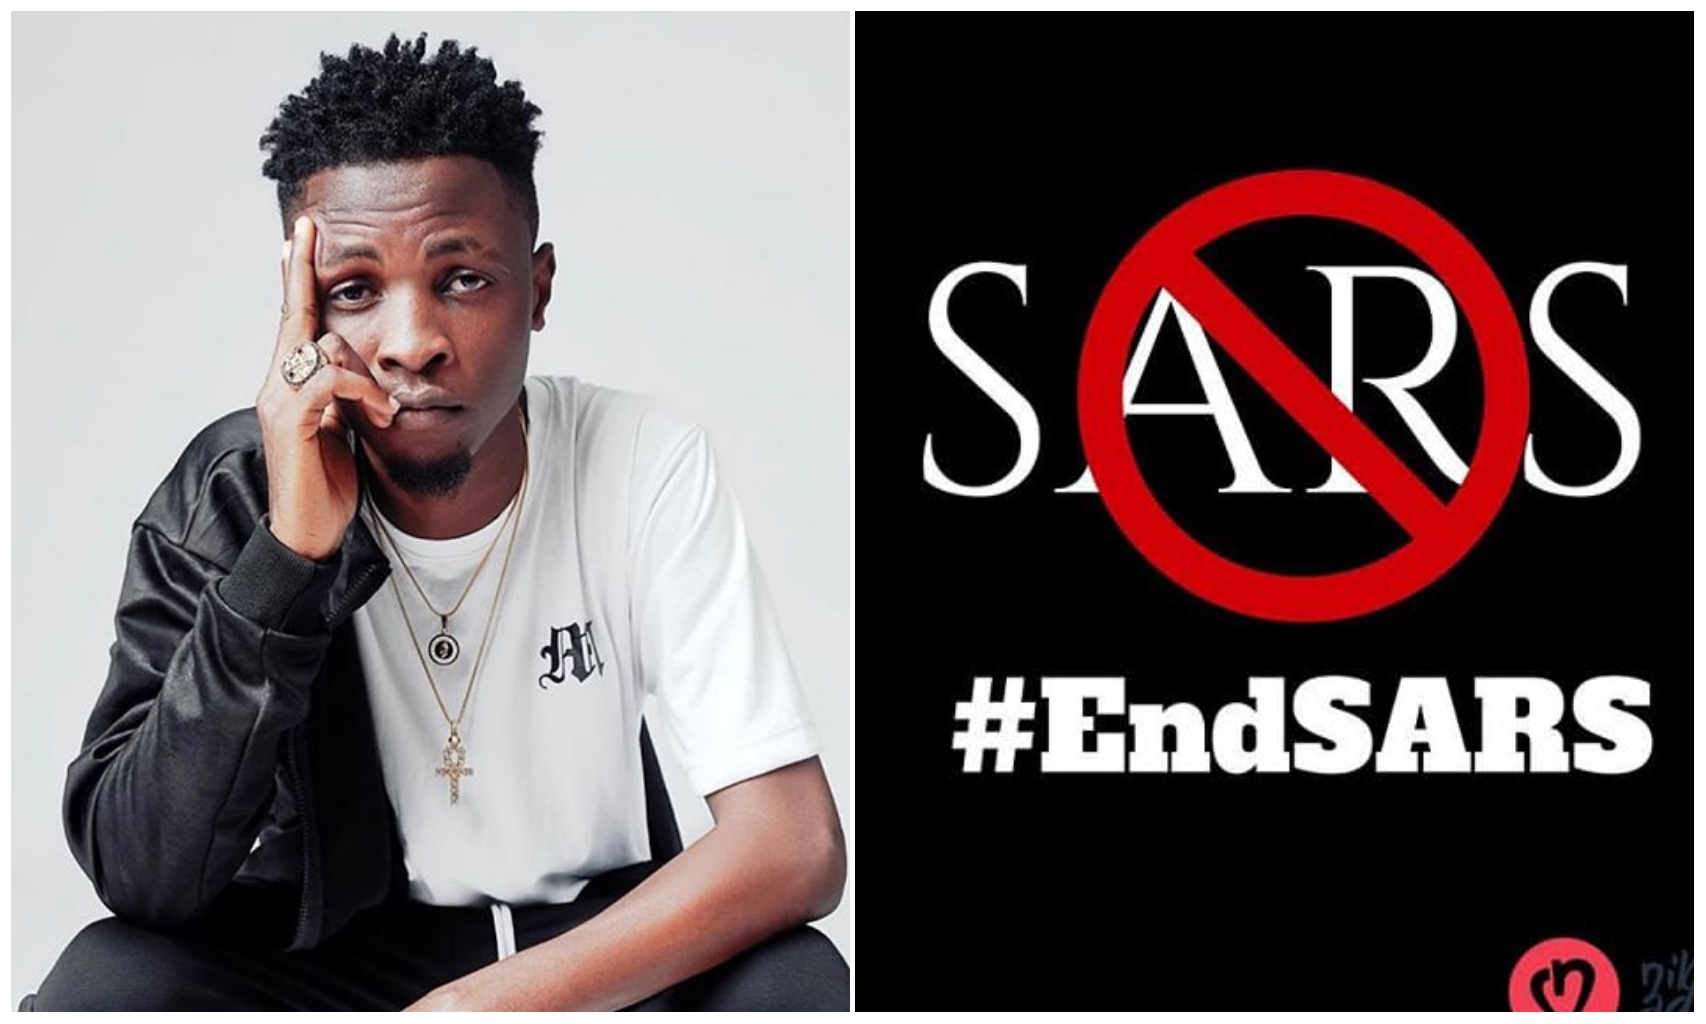 #BBNaija: Watch Laycon's strong message to SARS as #EndSars trends (Video)